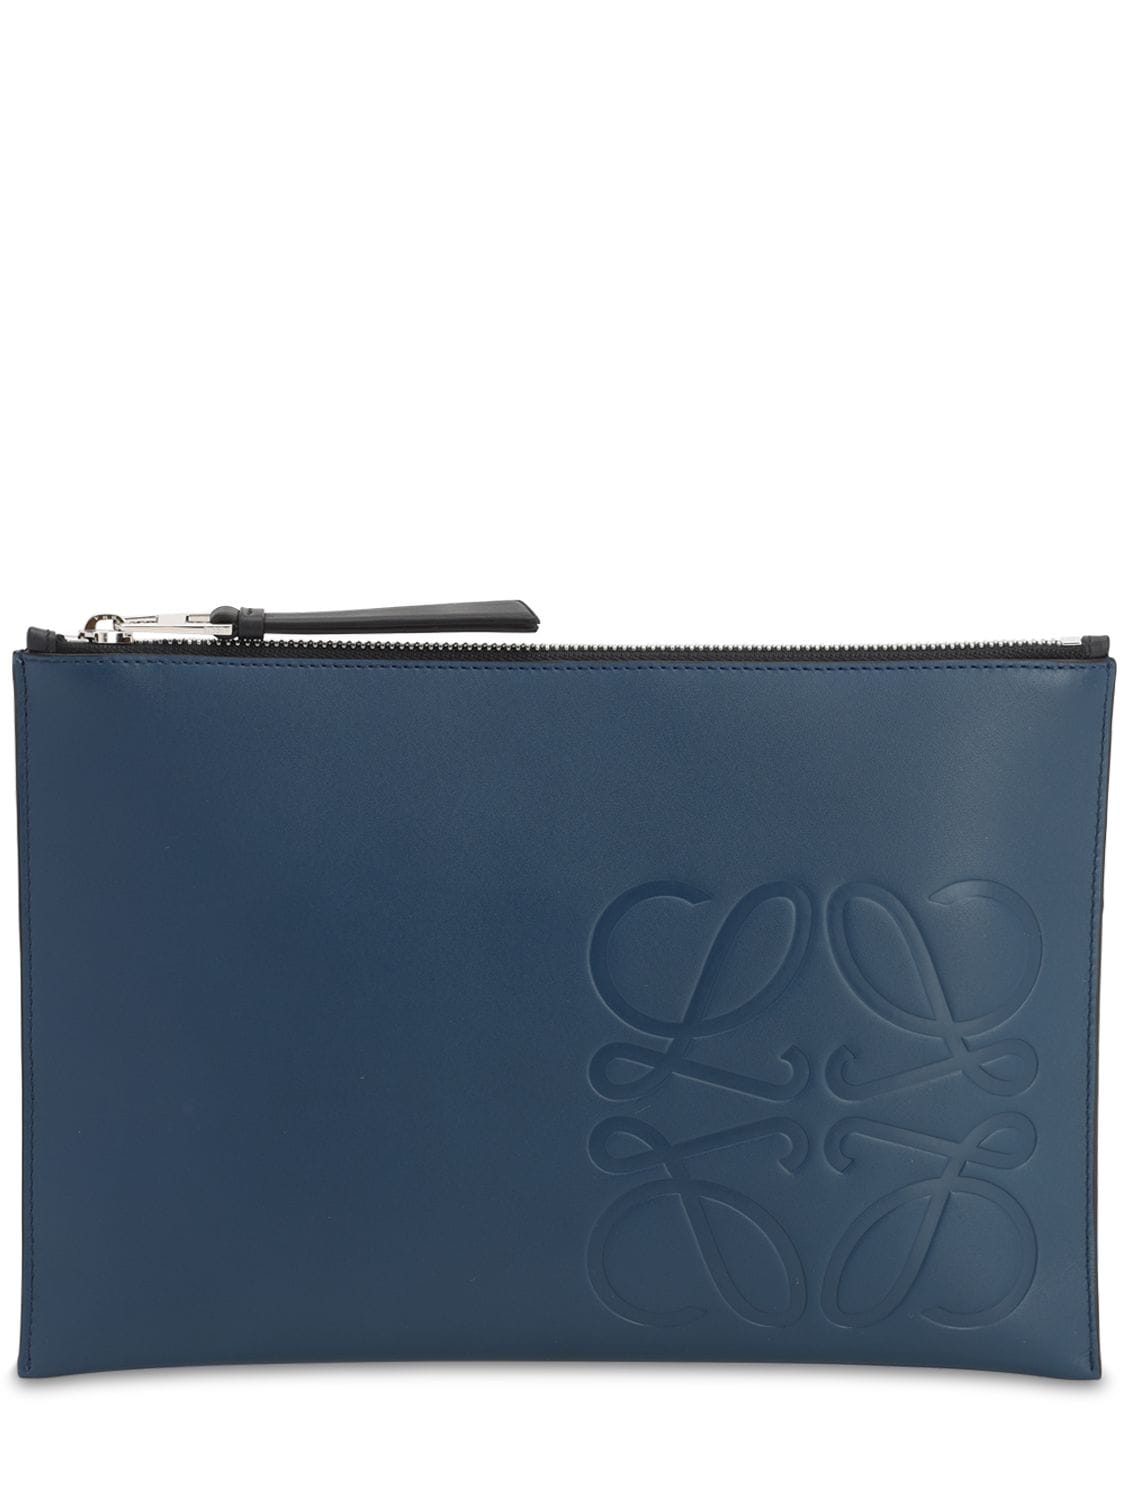 Loewe Smooth Leather Anagram Pouch In Indigo